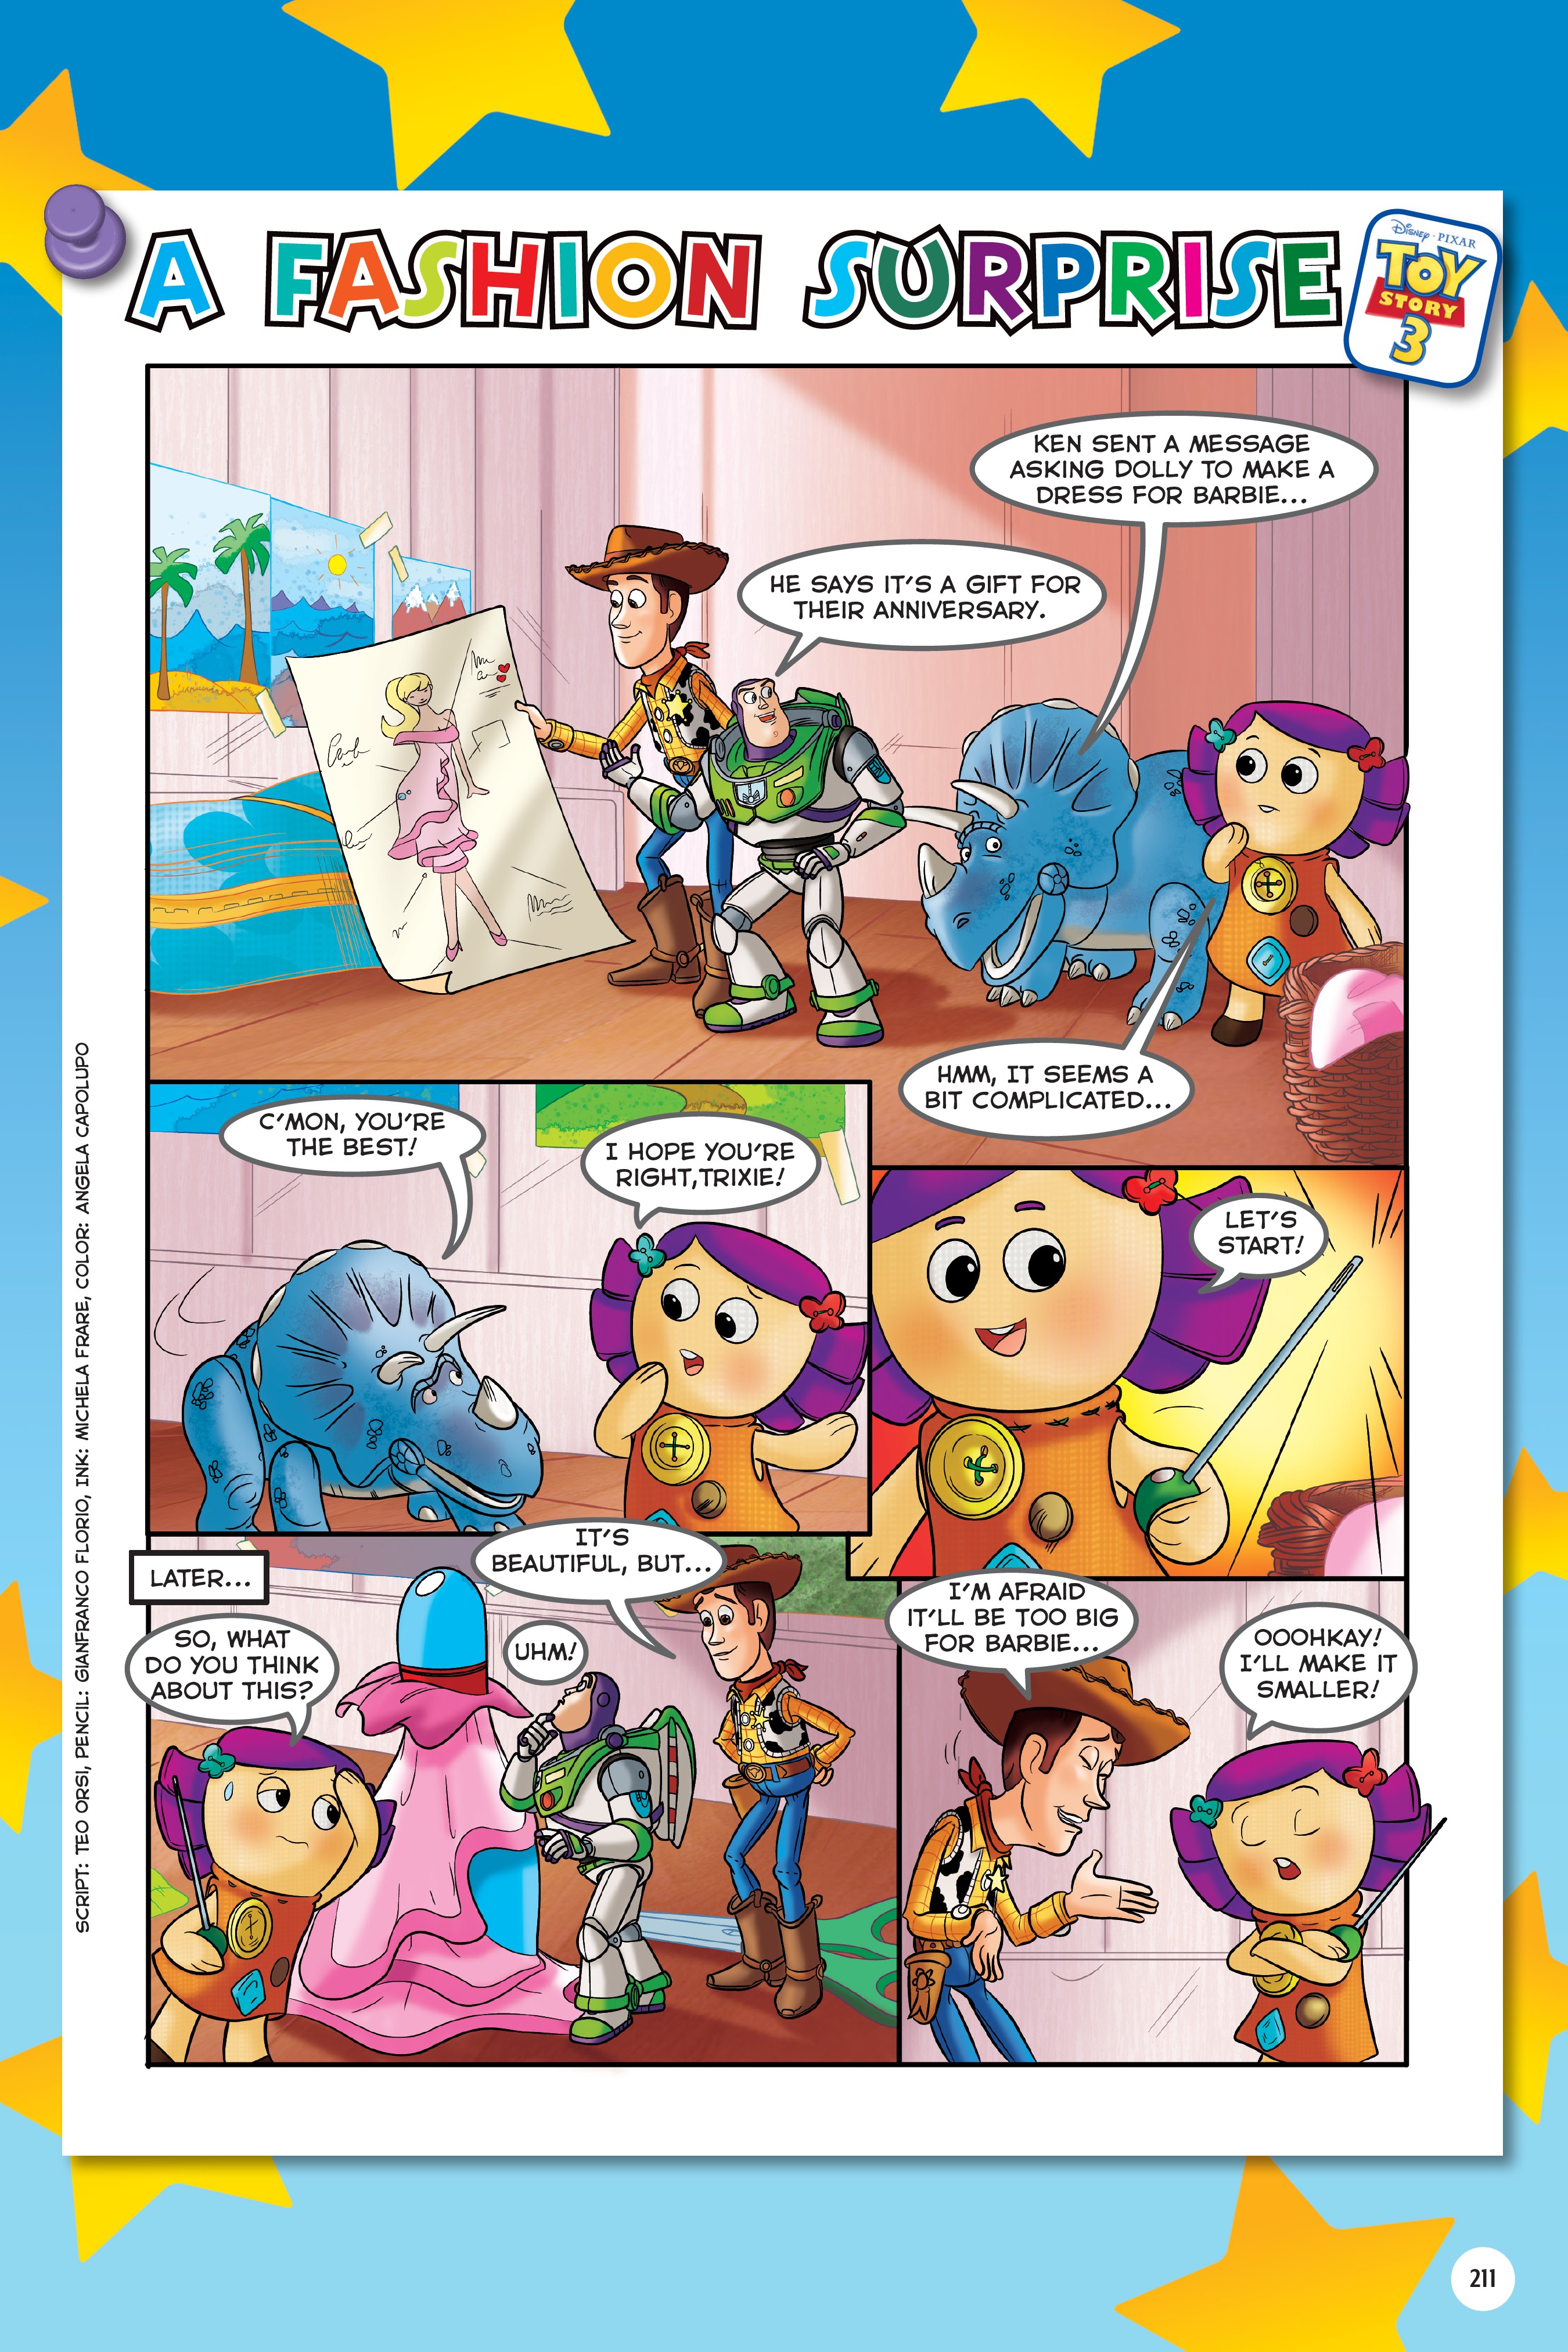 Disney Pixar Toy Story Adventures Tpb 1 Part 3 | Read Disney Pixar Toy Story  Adventures Tpb 1 Part 3 comic online in high quality. Read Full Comic  online for free -